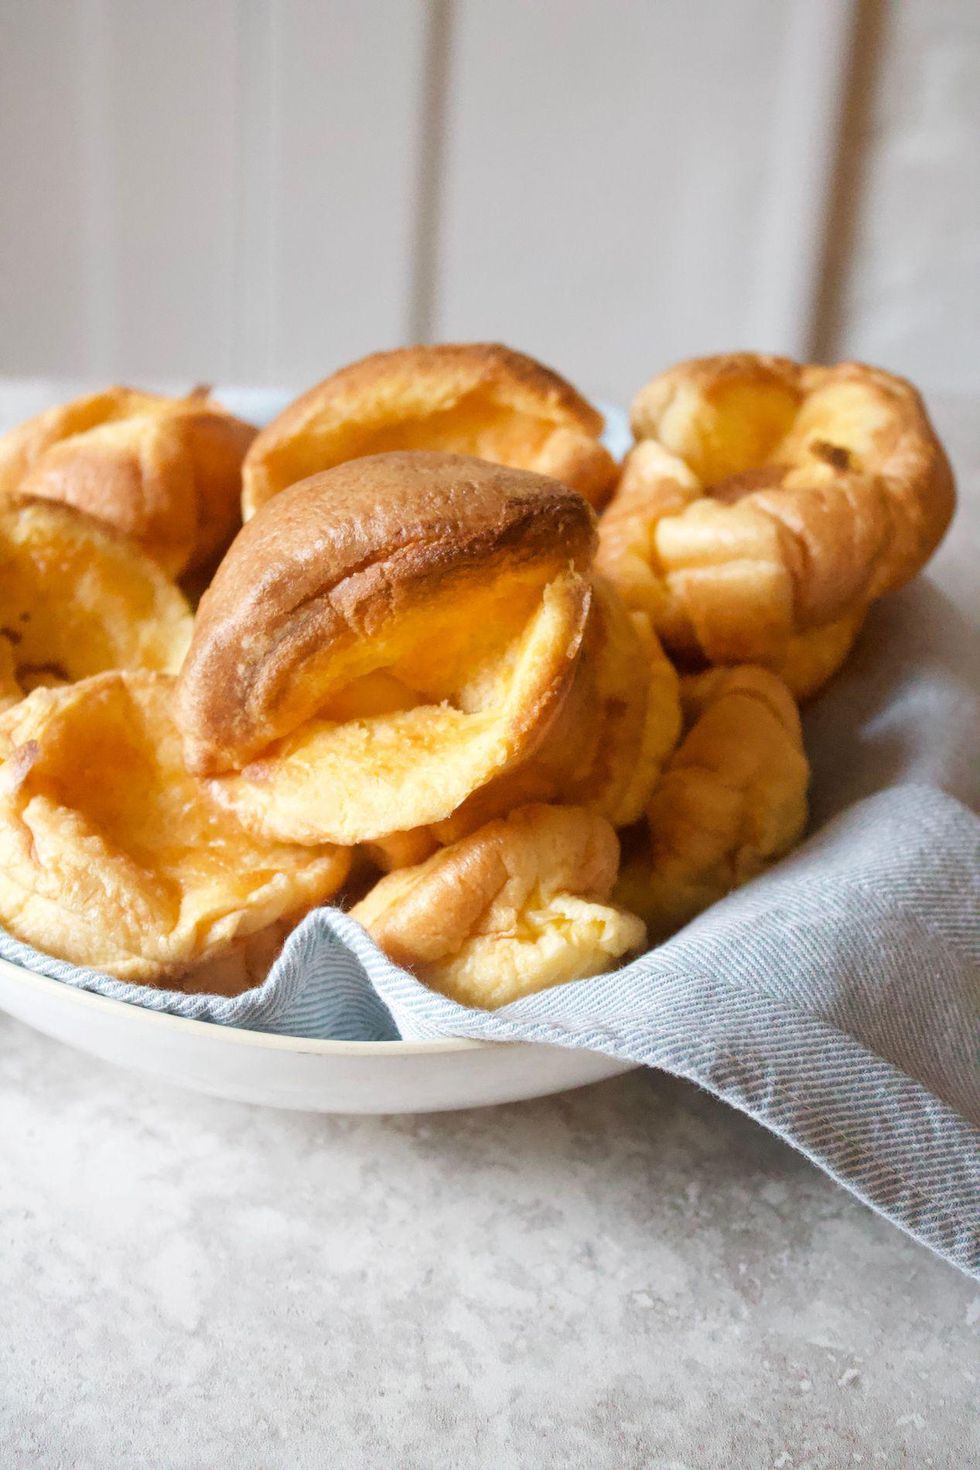 https://www.brit.co/media-library/yorkshire-pudding.jpg?id=28242053&width=980